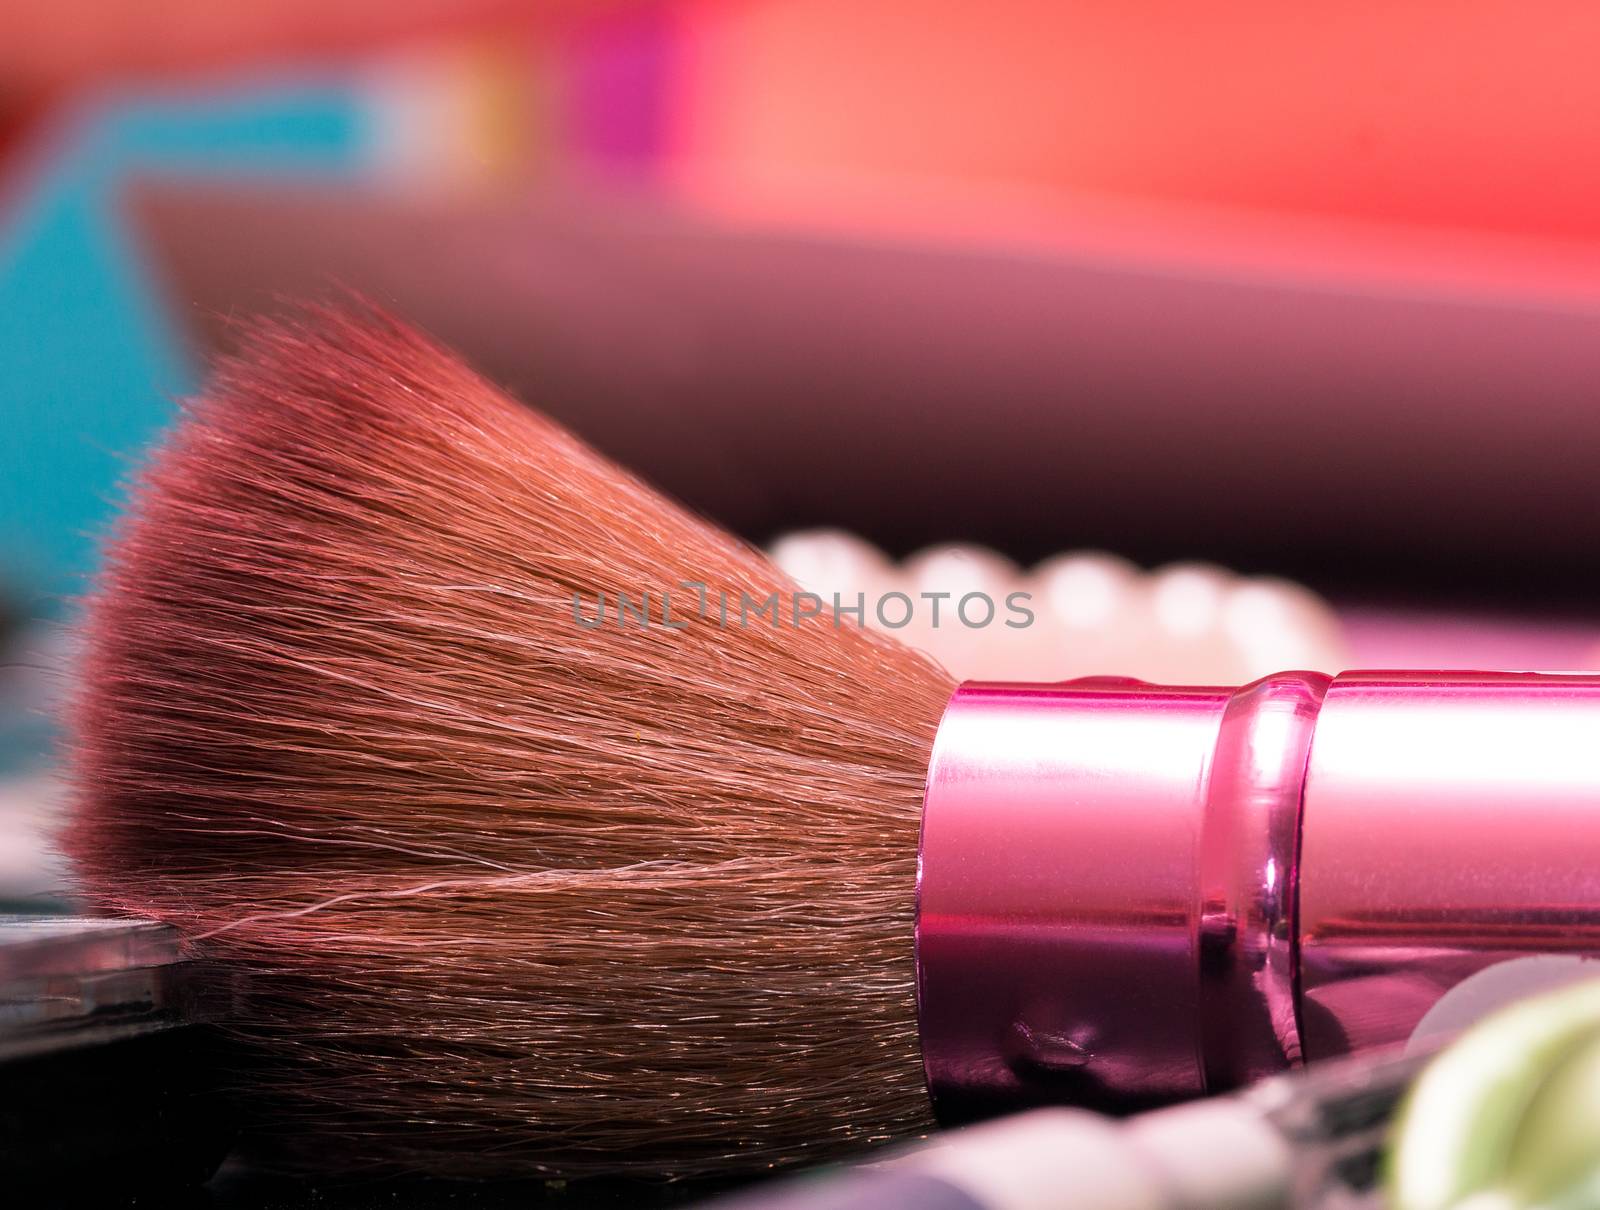 Brush For Makeups Represents Beauty Product And Brushes  by stuartmiles